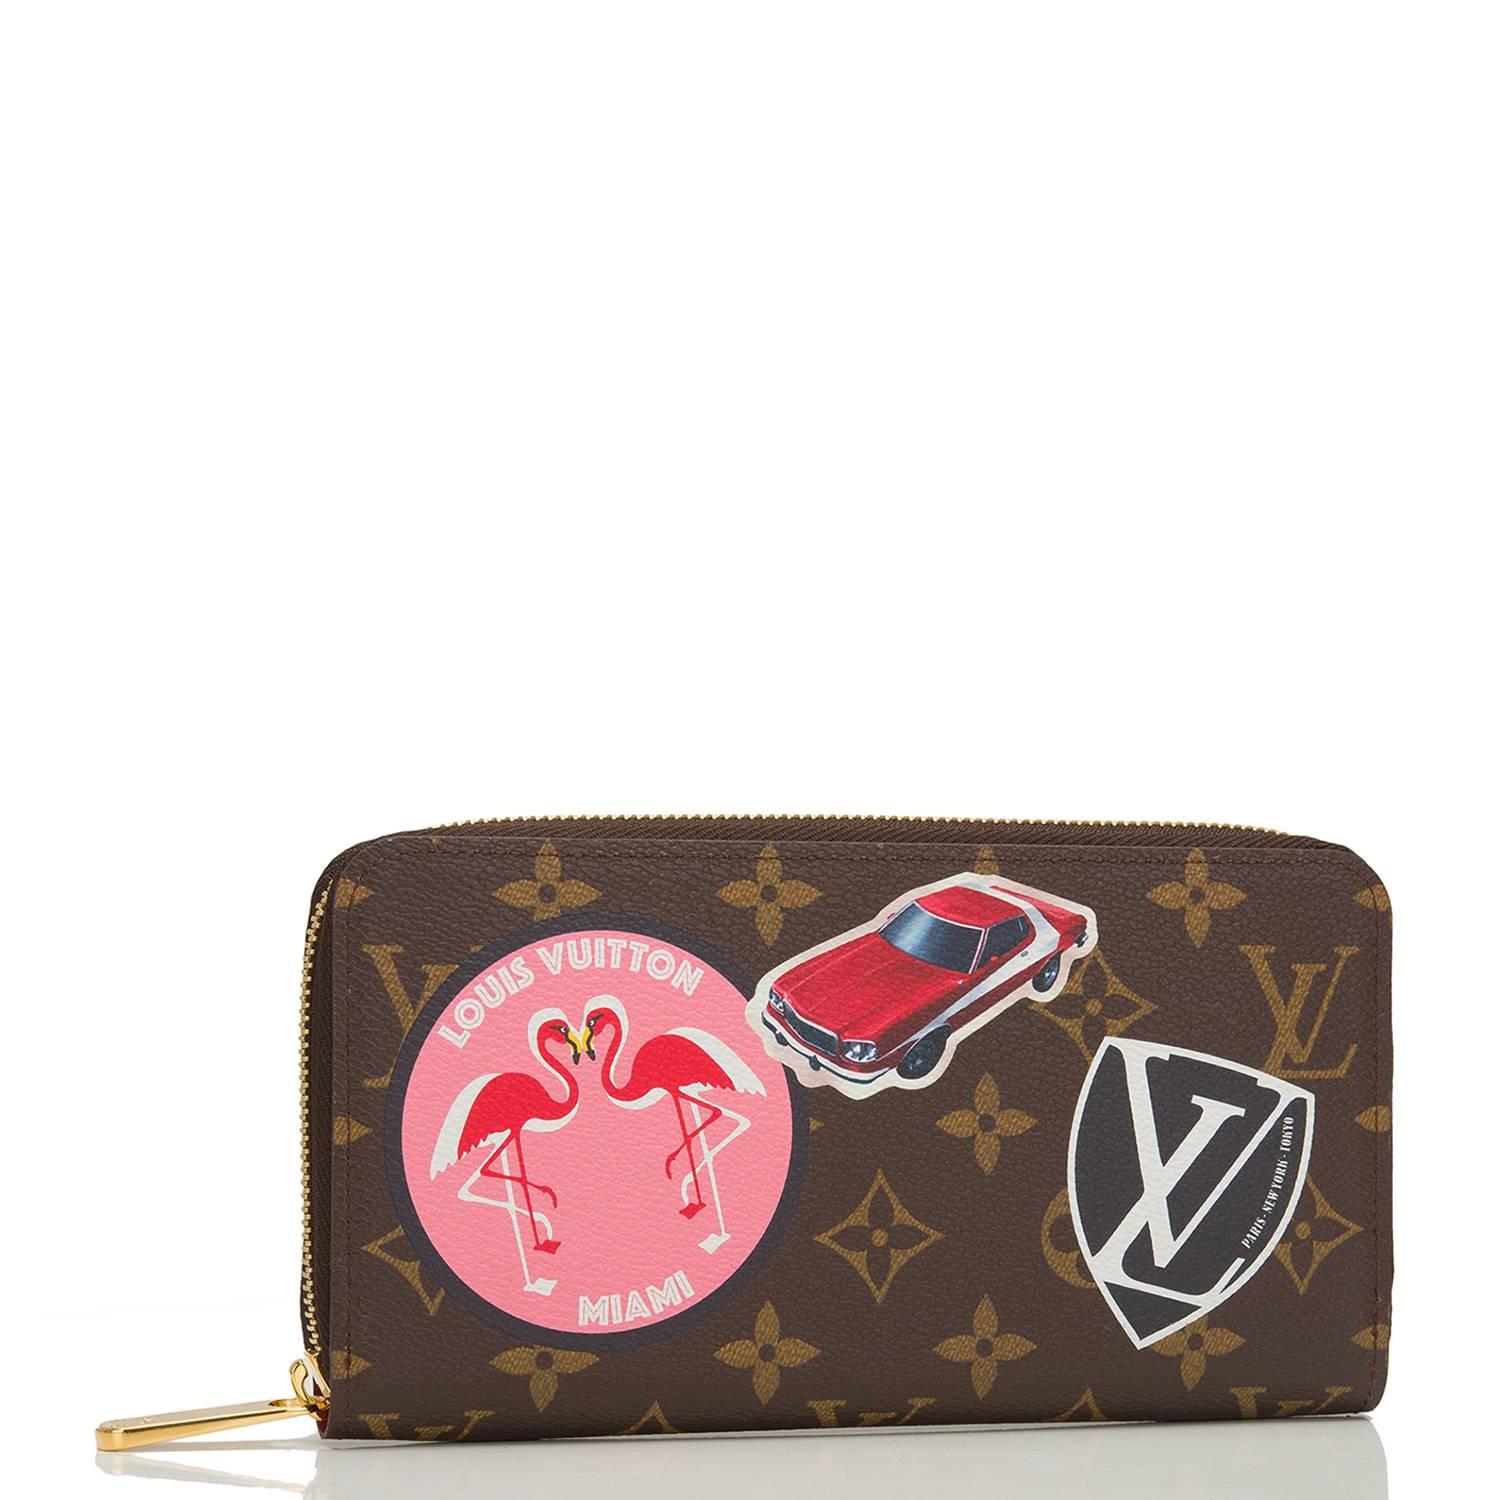 Louis Vuitton Monogram World Tour Zippy Wallet of coated canvas and polished brass hardware.

This limited edition wallet features stamps screened over the classic Monogram design and a 3/4 wrap around zipper with Louis Vuitton stamped polished